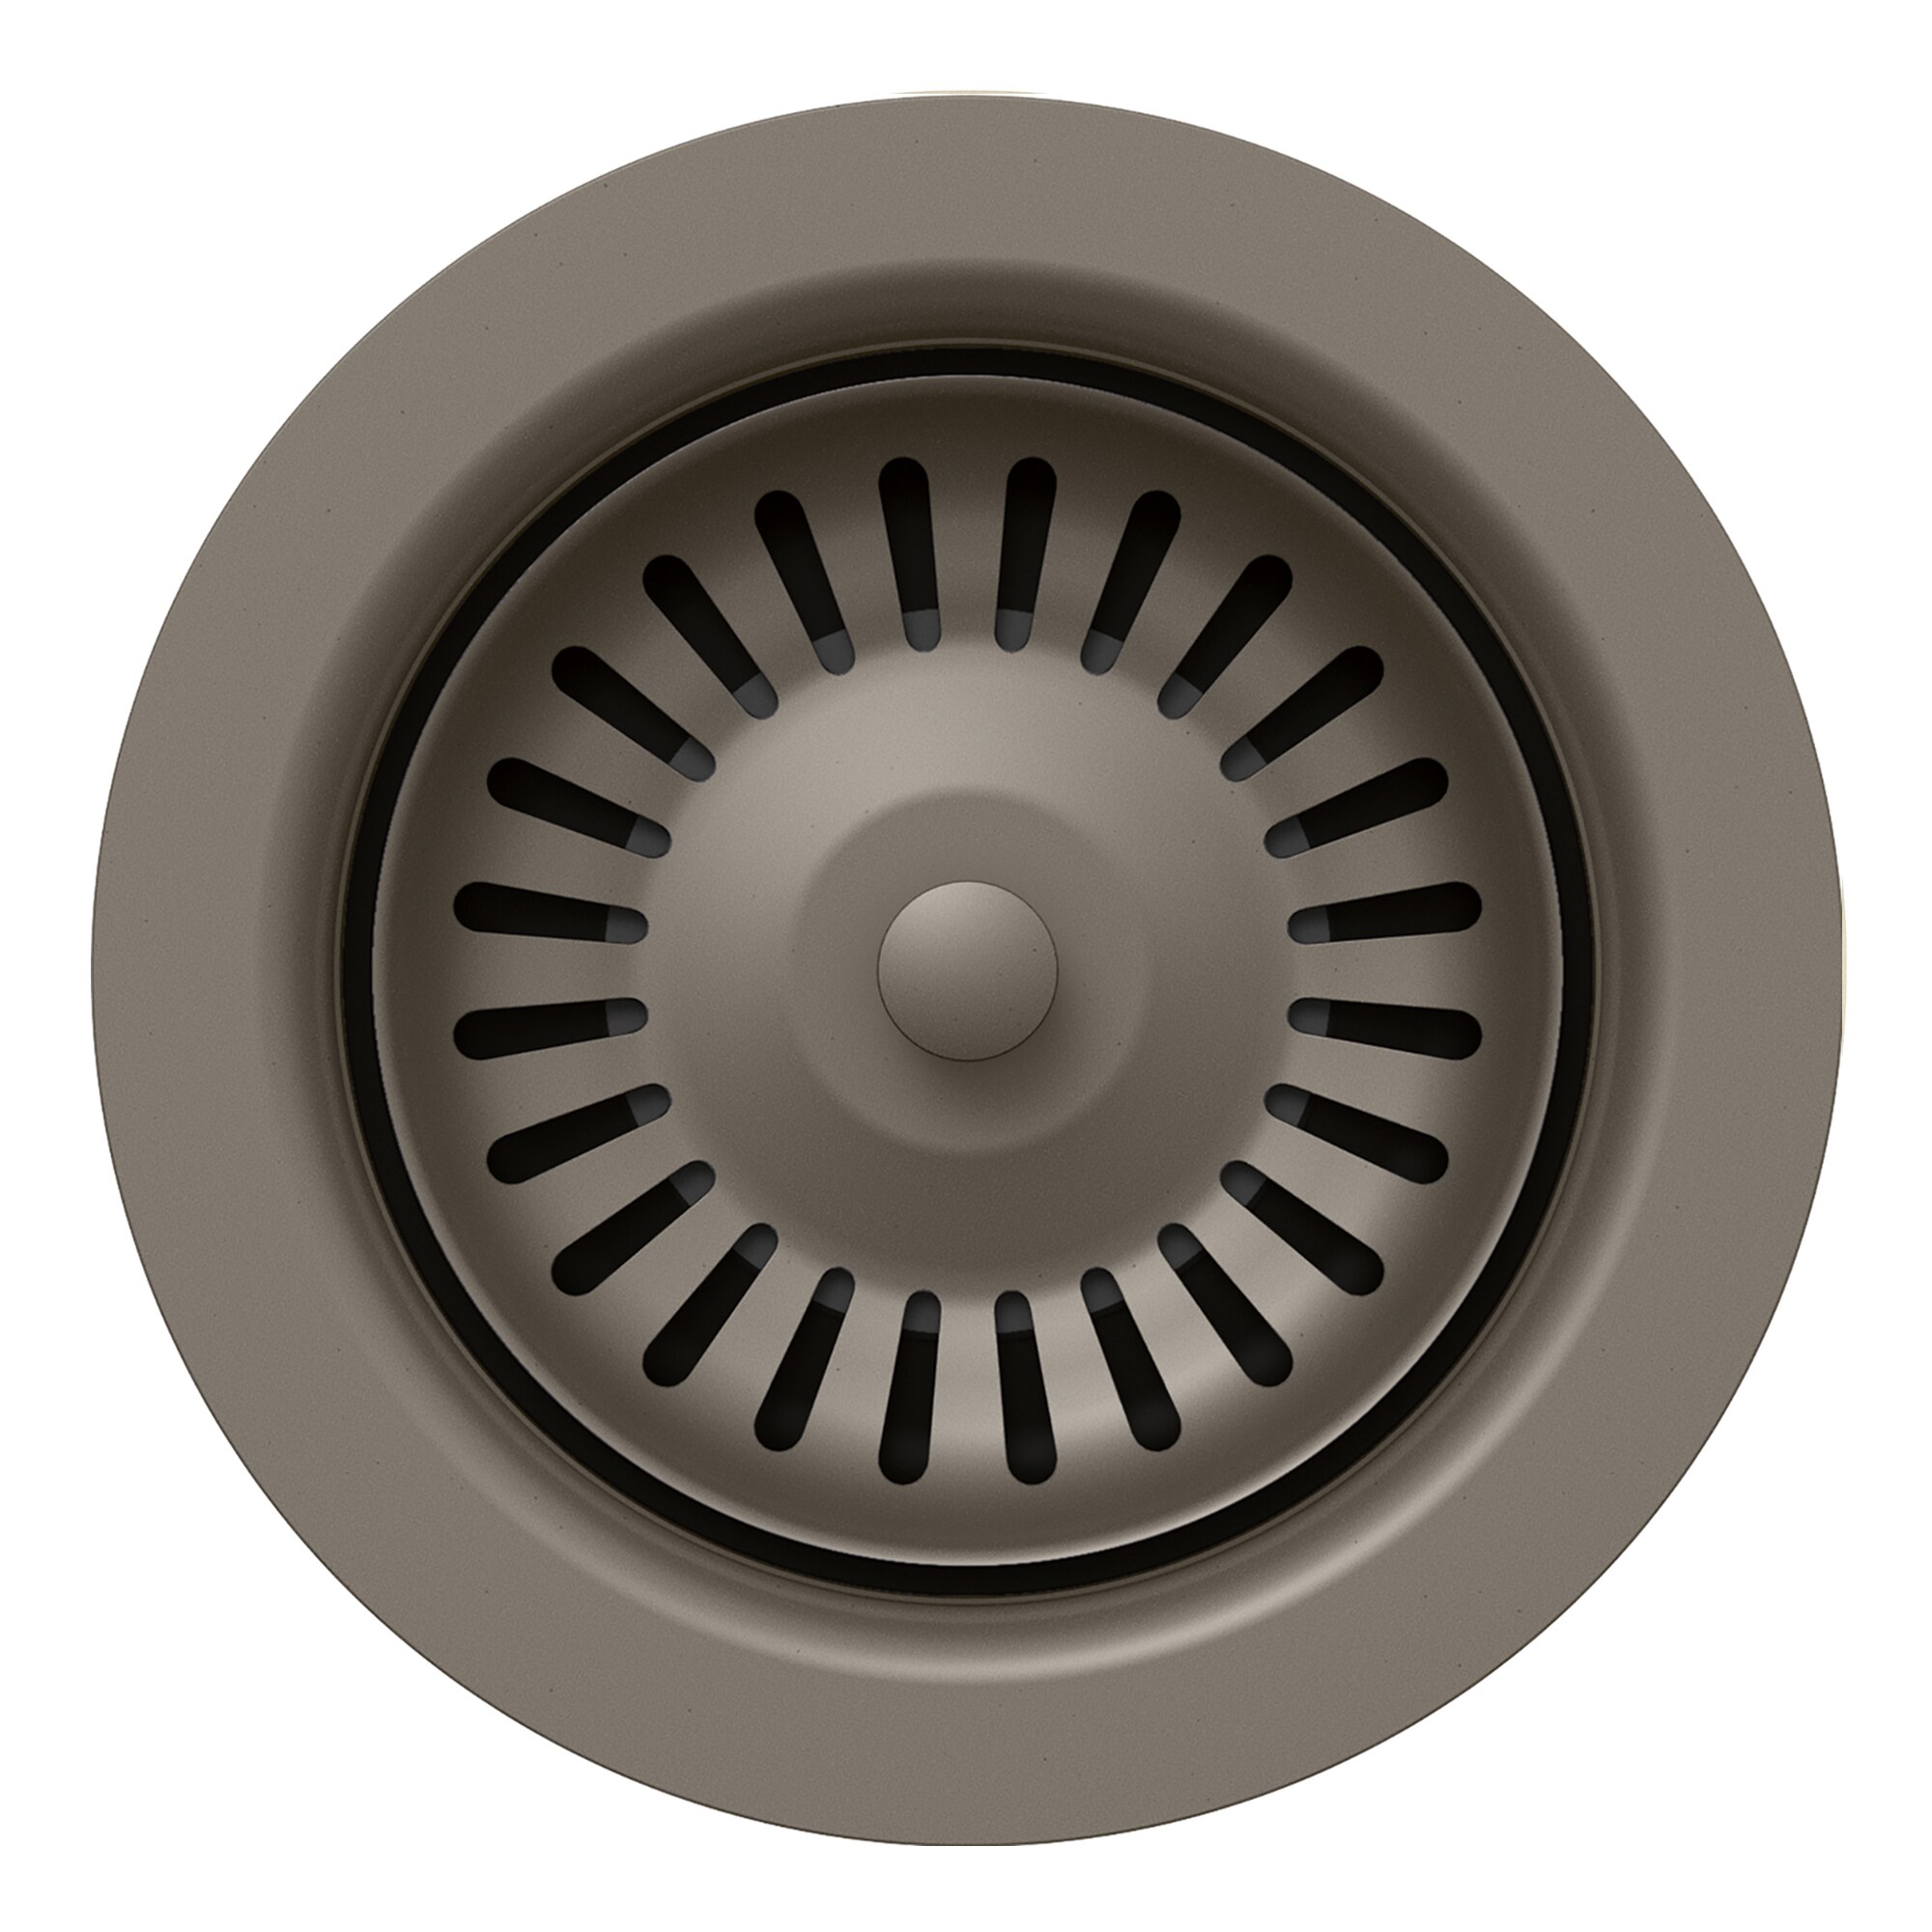 Blanco 442228 Metallic Gray 3-1/2 Basket Strainer and Sink Flange (Not for  use with Garbage Disposal) 